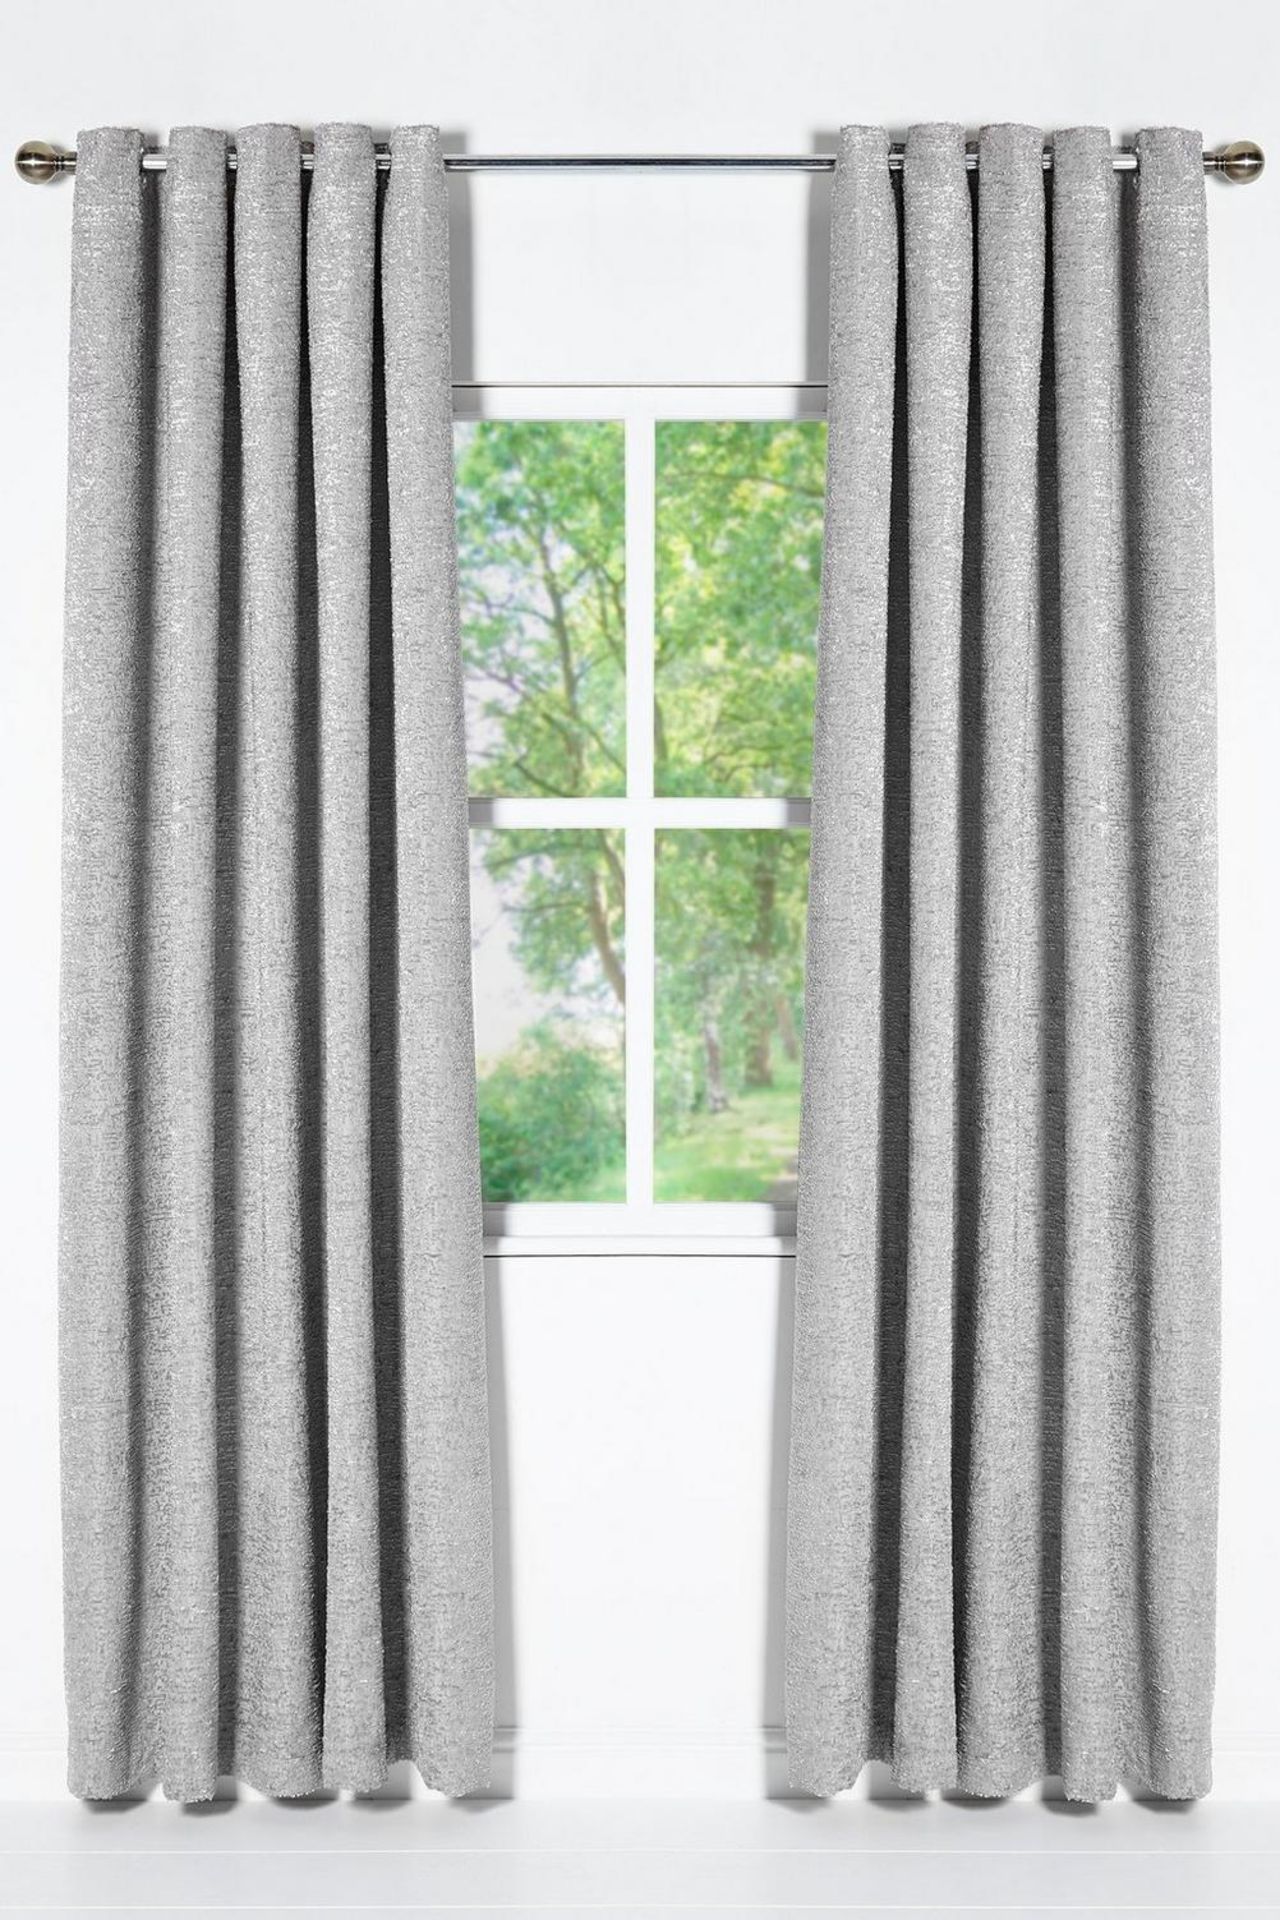 1 AS NEW BAGGED LUXURY TEXTURED SHREDDED CHENILLE FULLY LINED EYELET CURTAINS IN SILVER 66x90